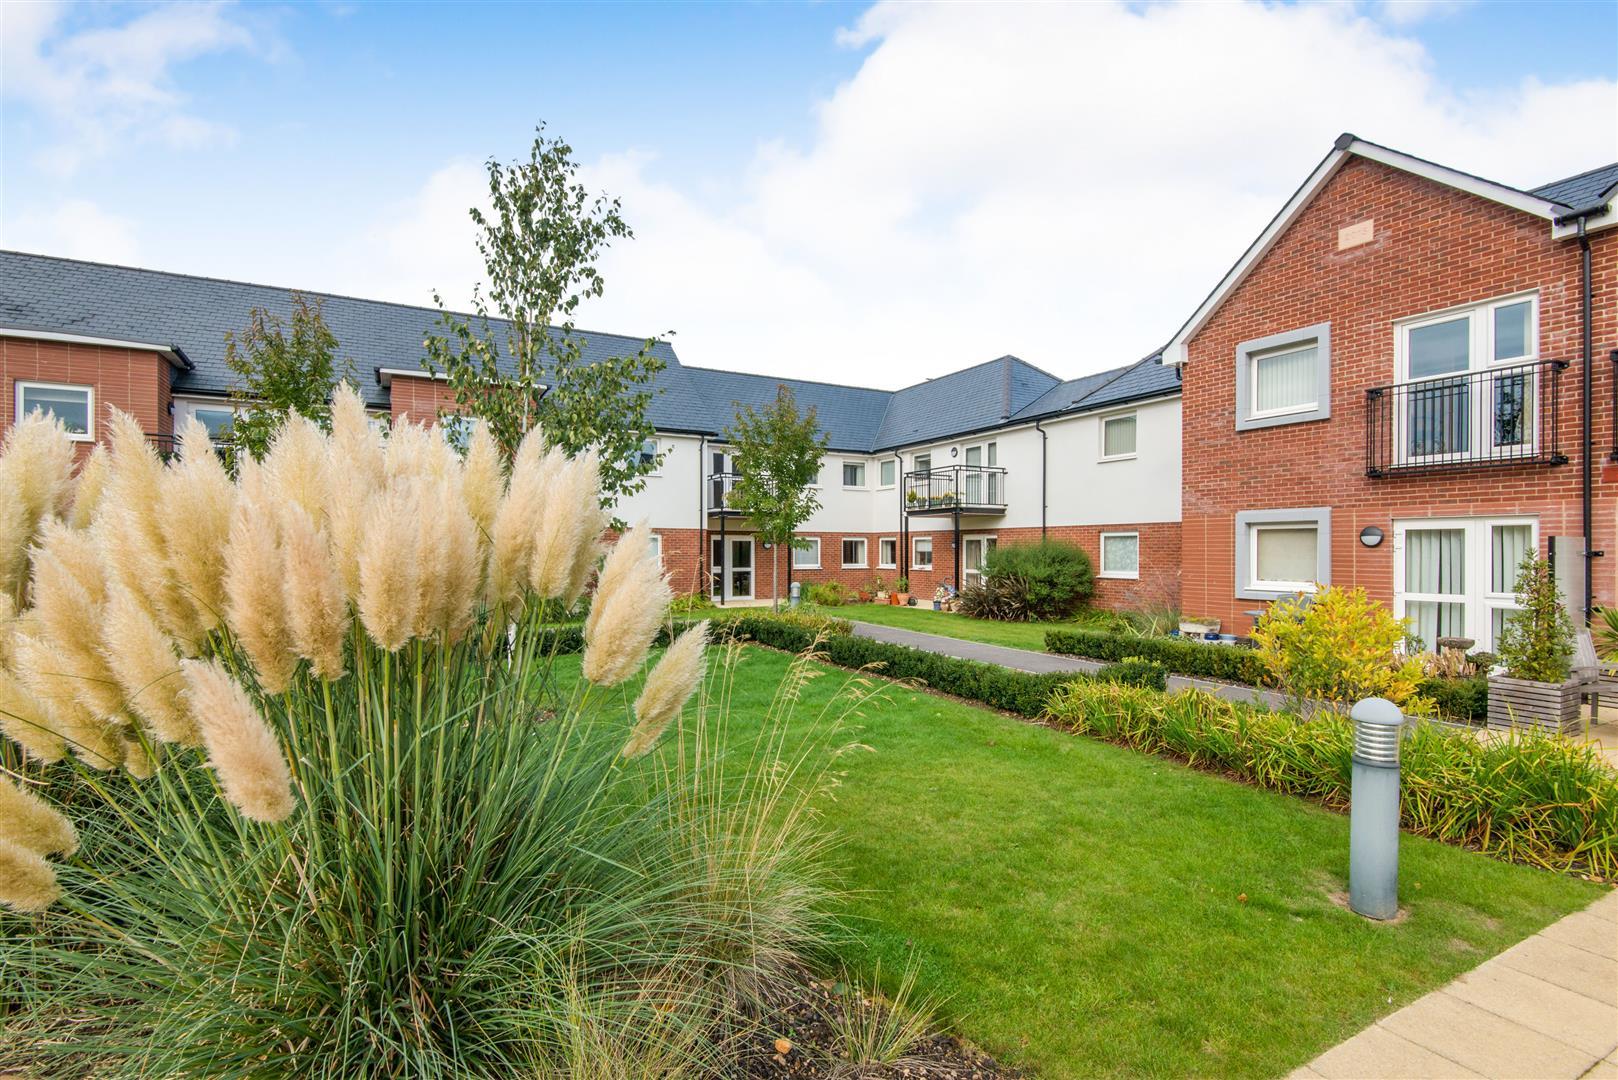 Hillier Court, Botley Road, Romsey, Hampshire, SO51 5AB